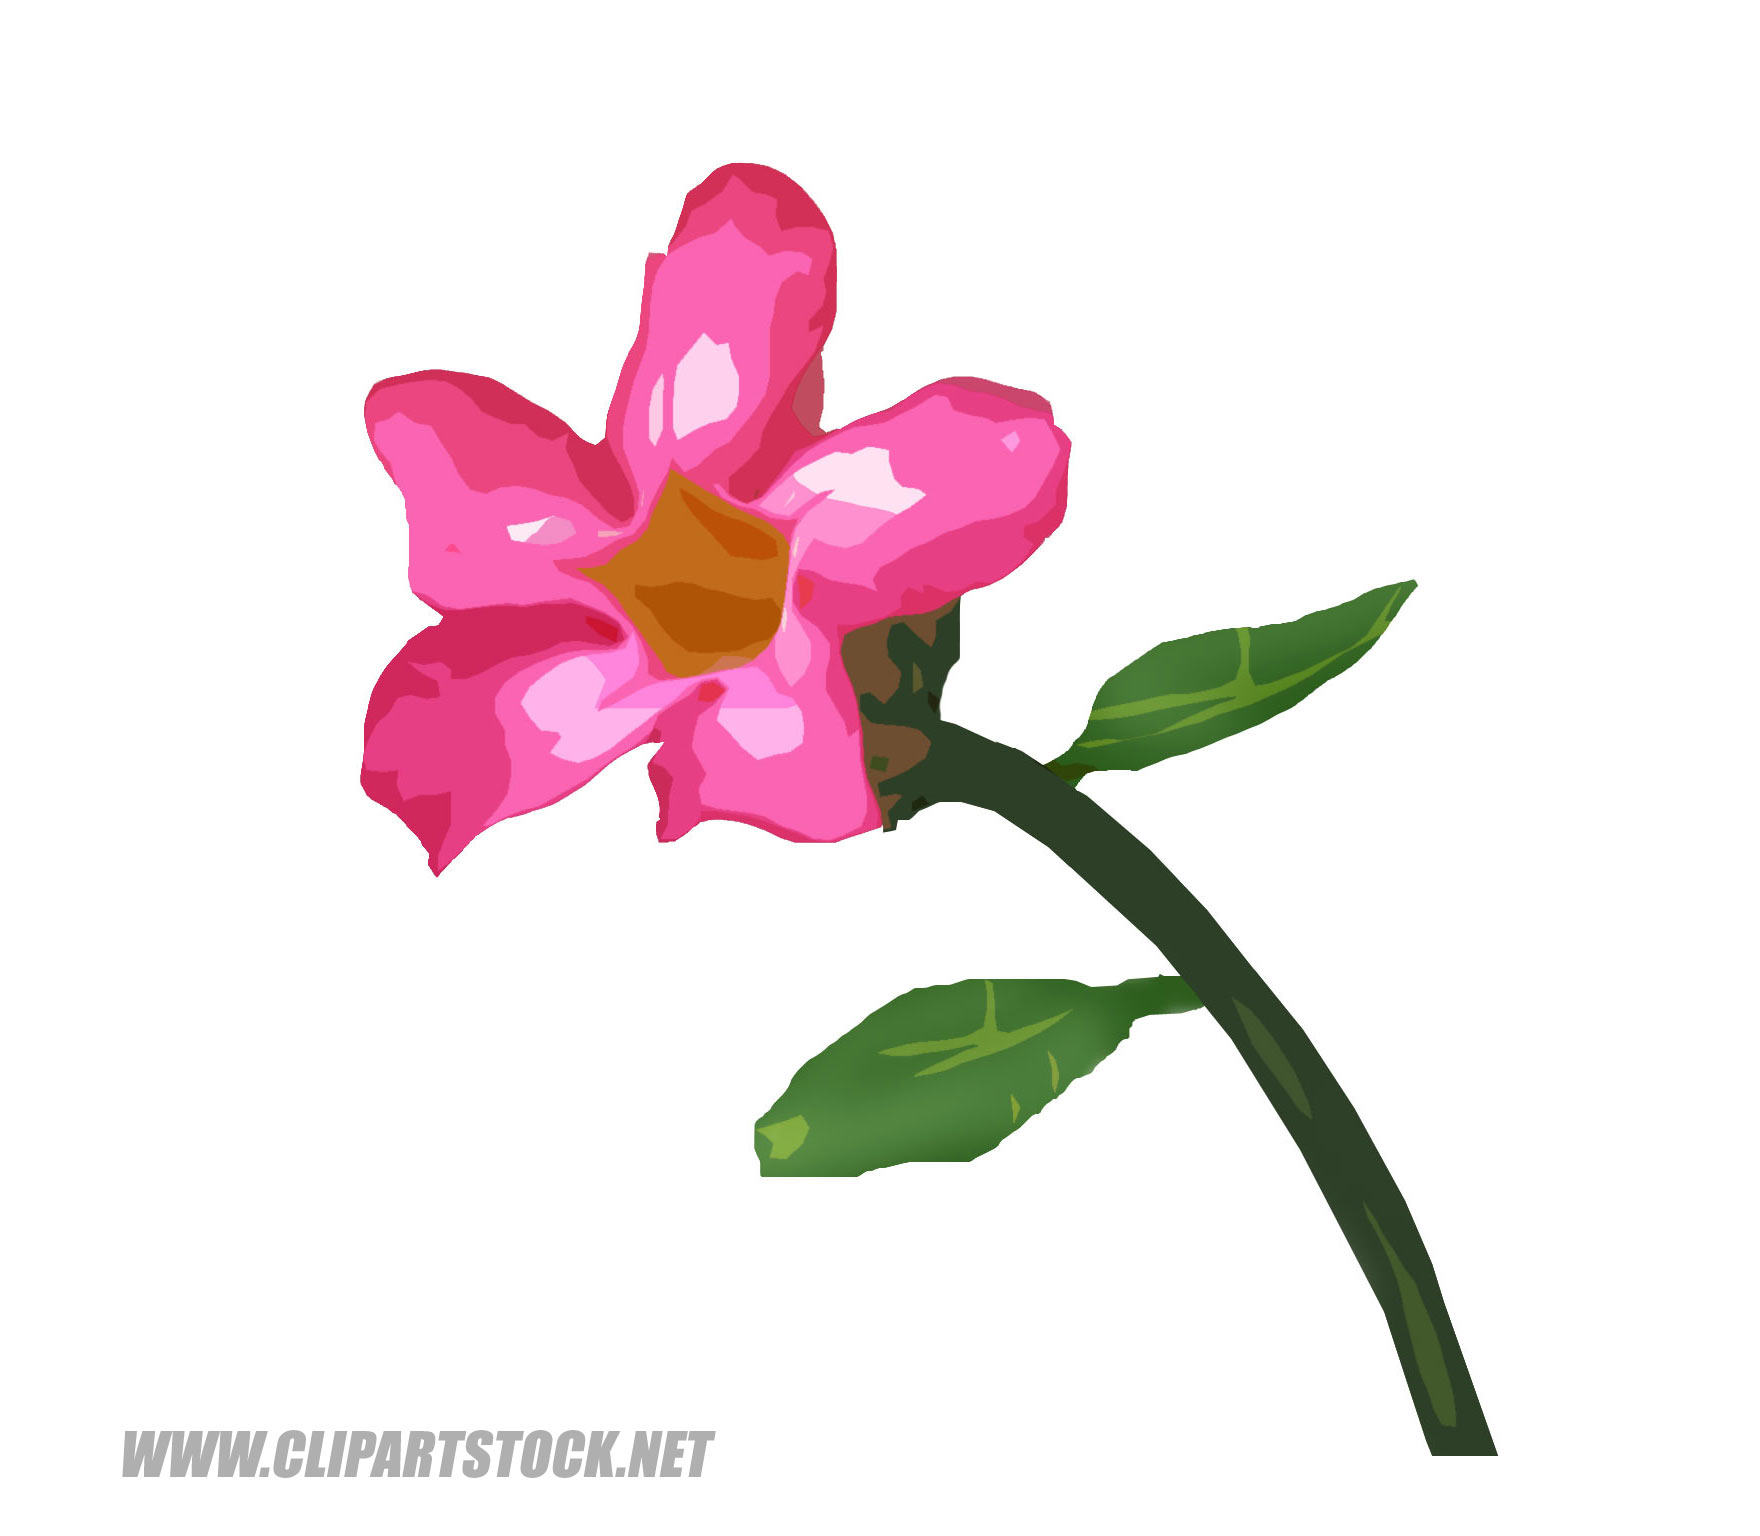 Nature Theme Flowers Clipart  Use This Pink Flower Clip Art For